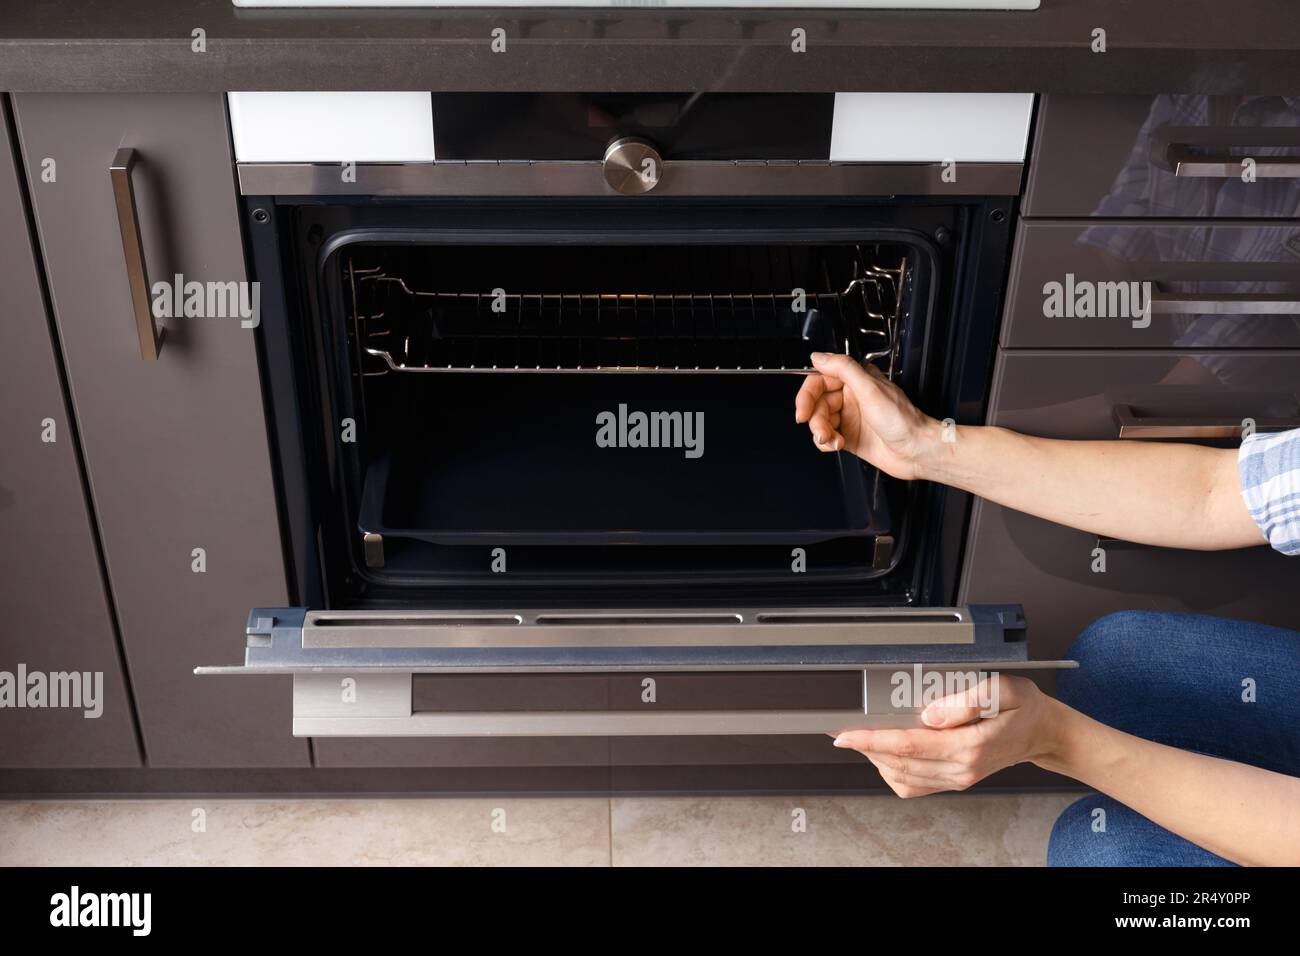 The girl opens the built-in oven door and takes out a baking sheet. Built-in oven with display in a modern kitchen interior. Stock Photo